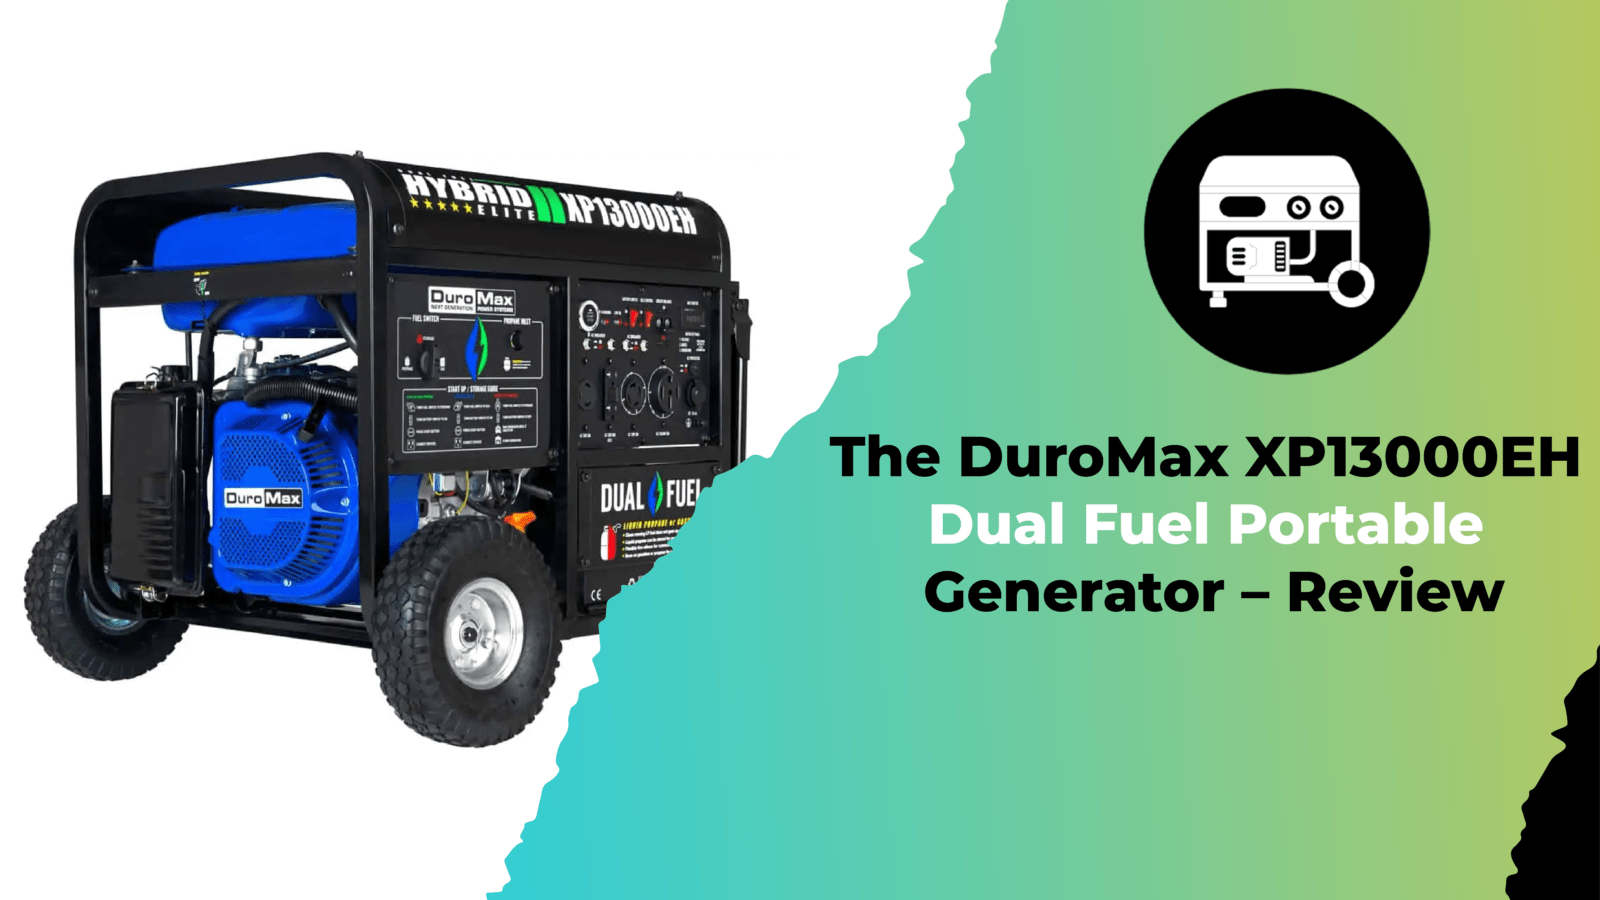 The DuroMax XP13000EH Dual Fuel Portable Generator – Review